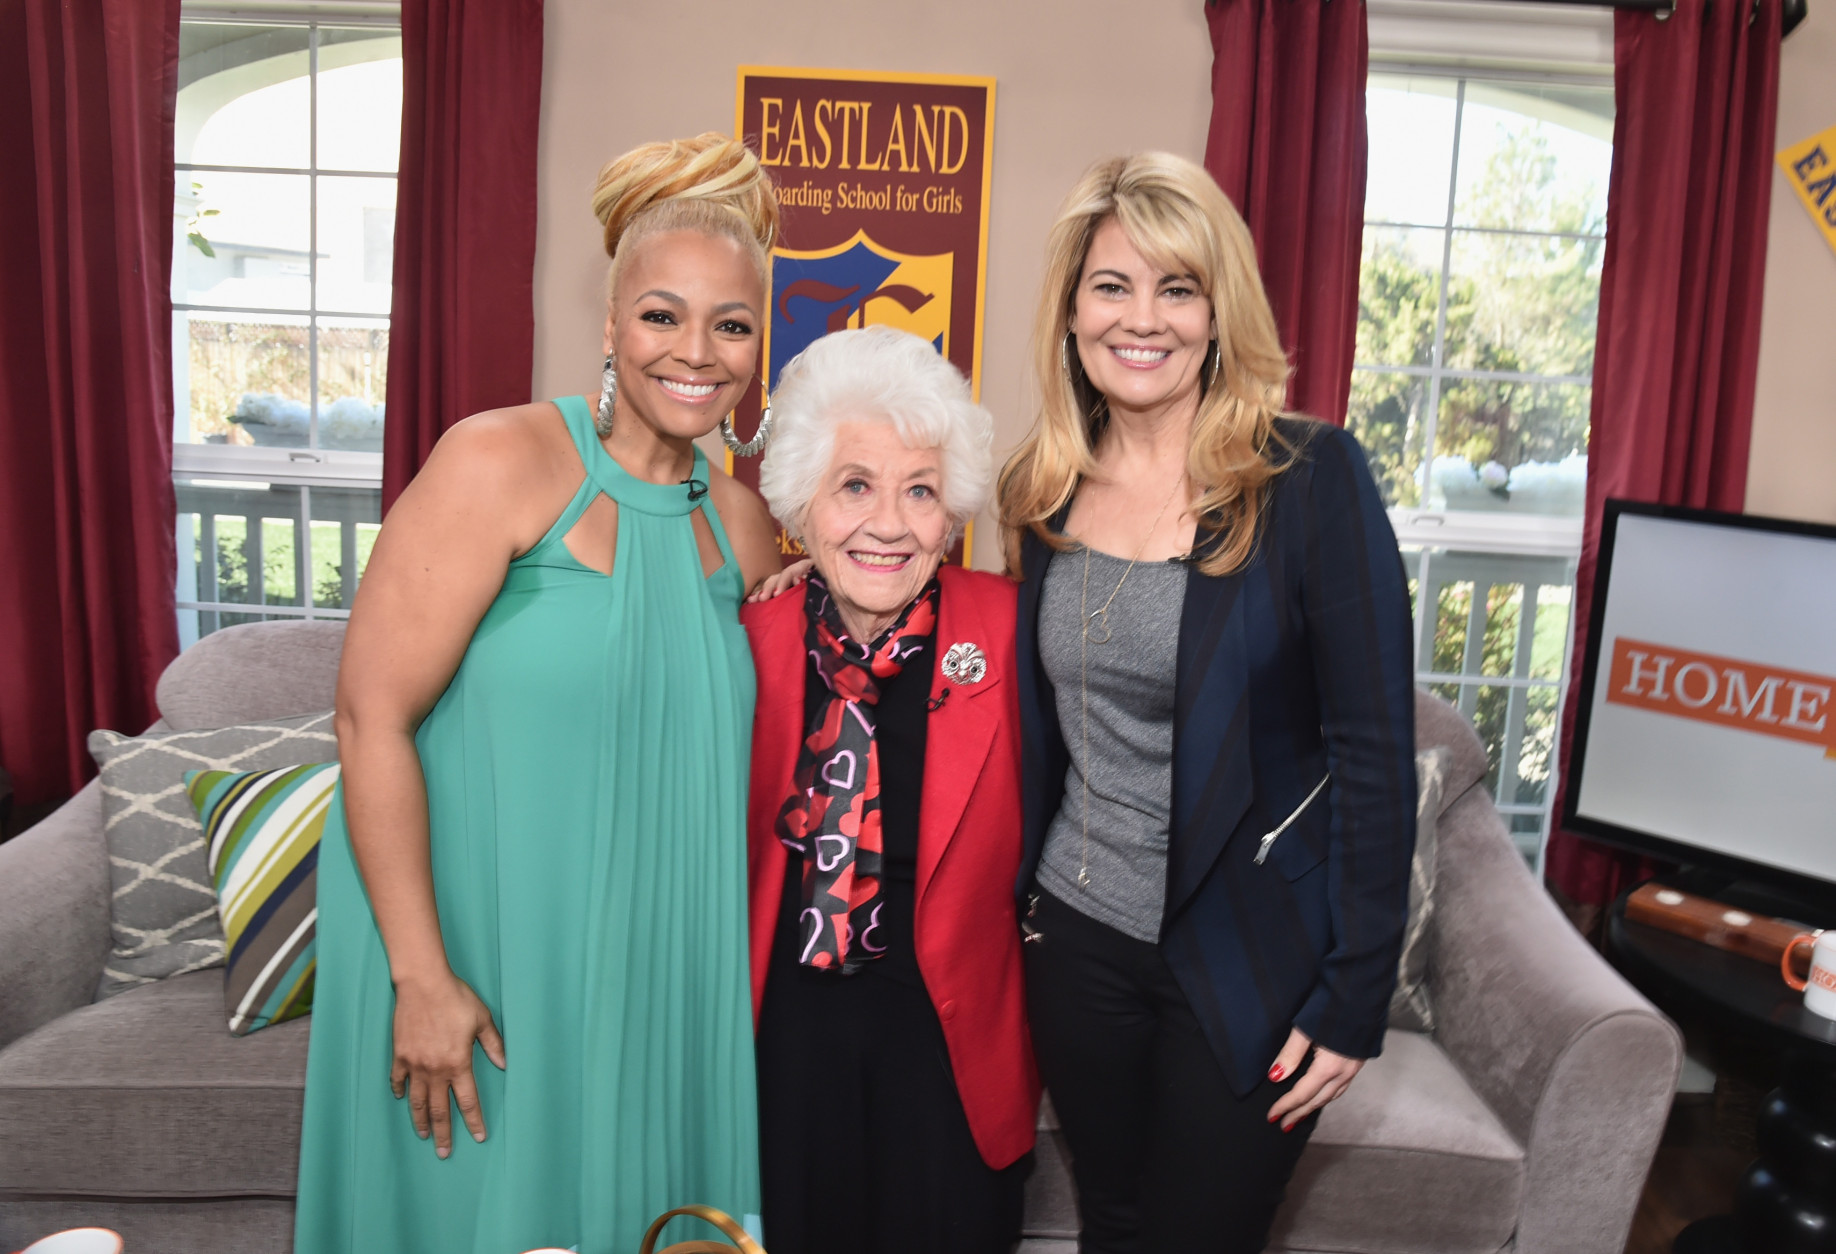 UNIVERSAL CITY, CA - FEBRUARY 12:  (L-R) Actresses Kim Fields, Charlotte Rae and Lisa Whelchel attend Hallmark's Home and Family "Facts Of Life Reunion" at Universal Studios Backlot on February 12, 2016 in Universal City, California.  (Photo by Alberto E. Rodriguez/Getty Images)